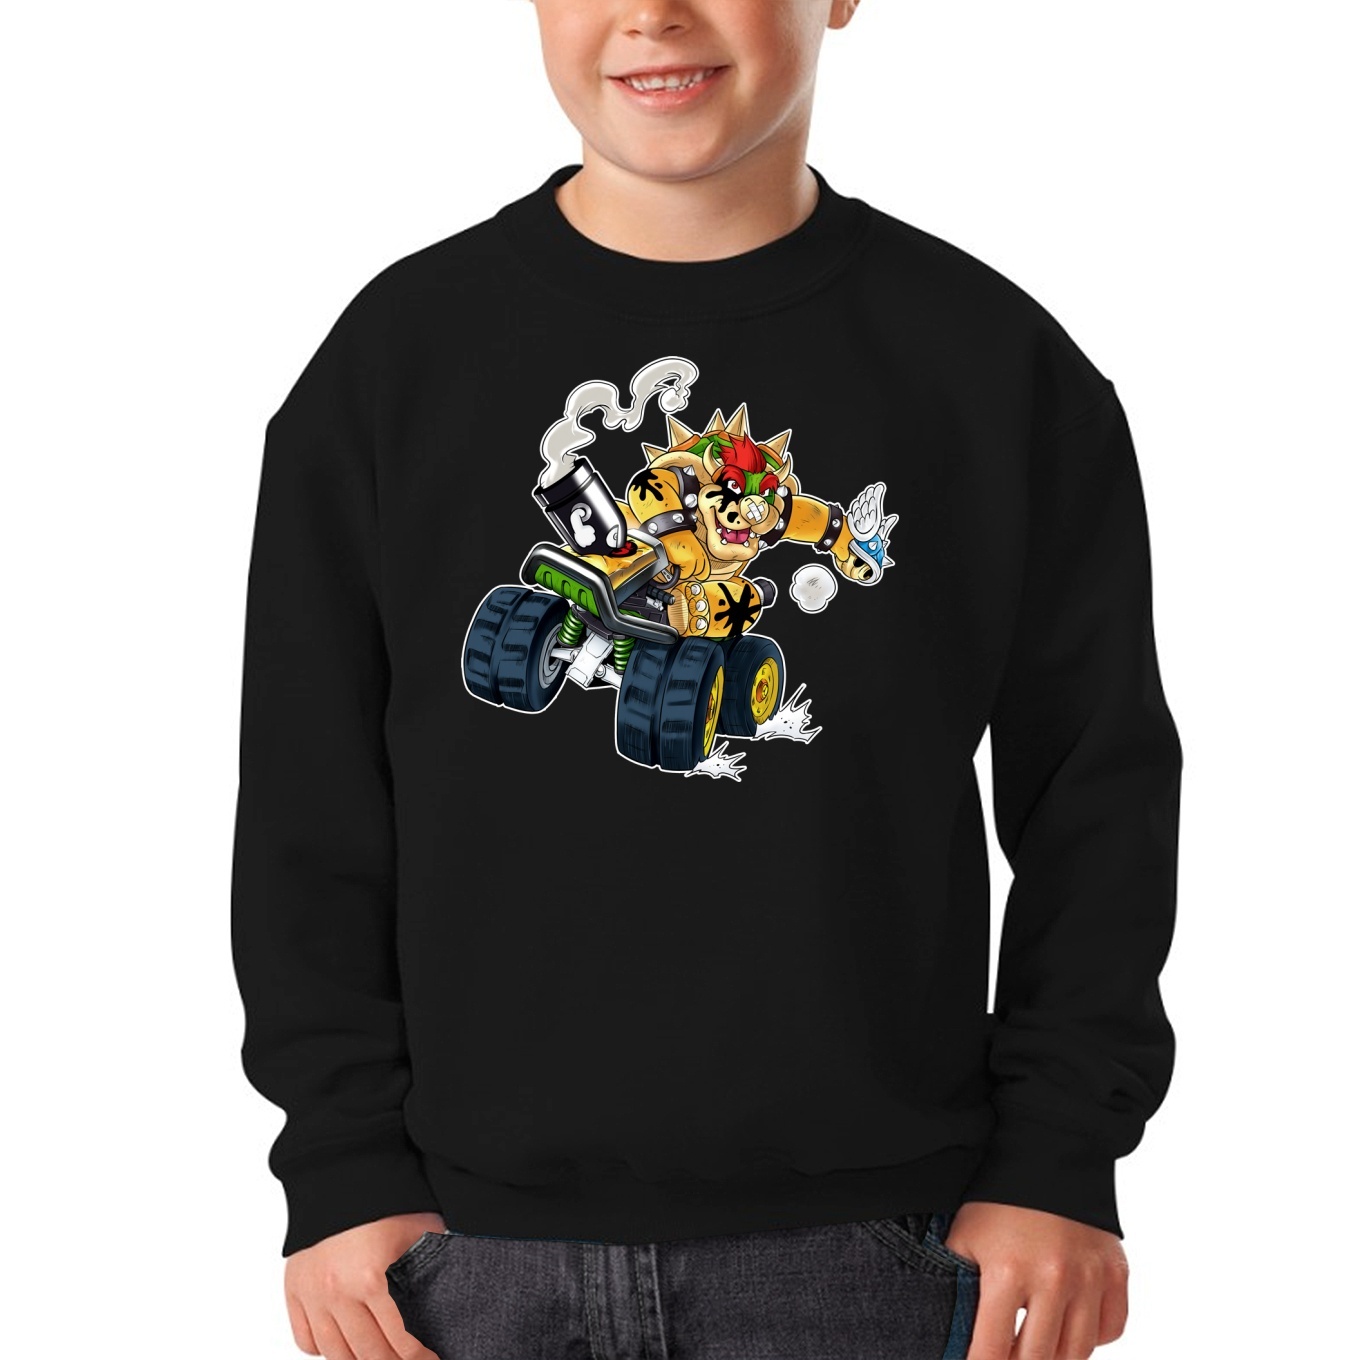 Bowser (Funny Mario Kart Parody - High Quality Pullover - Size 765 - Ref